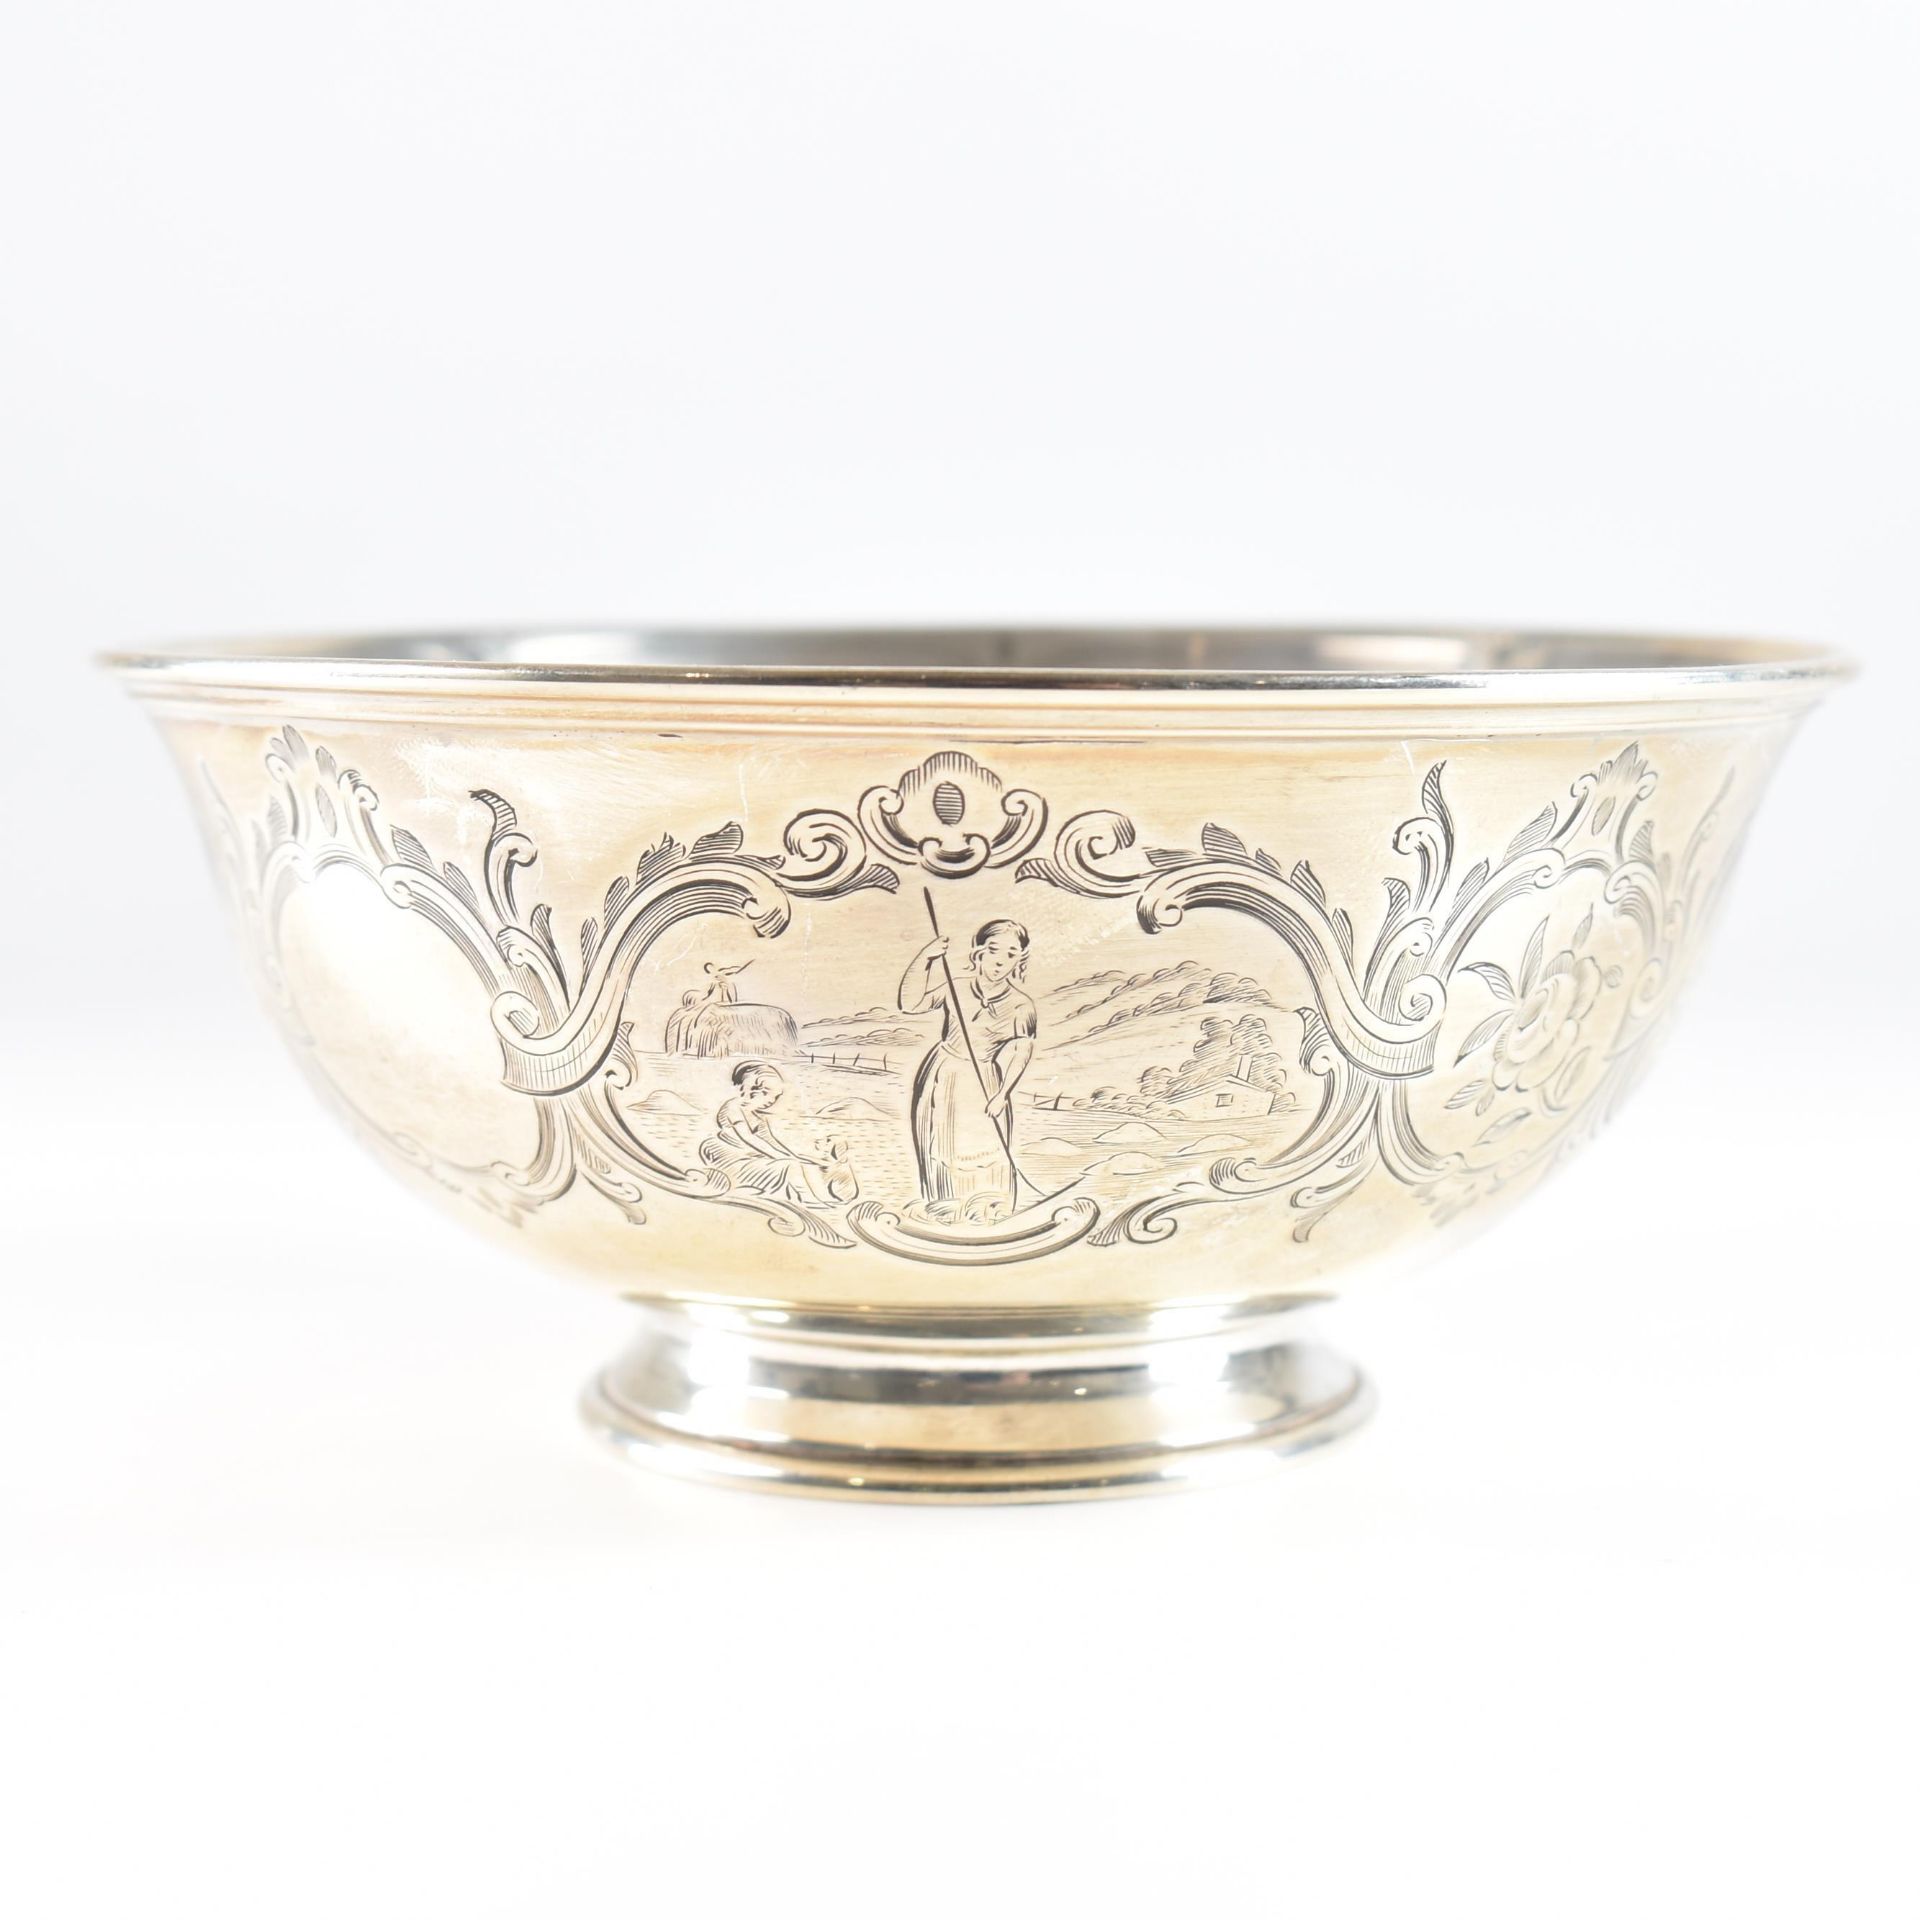 HALLMARKED VICTORIAN SILVER FARMING SCENE ETCHED DECORATION BOWL - Image 3 of 5